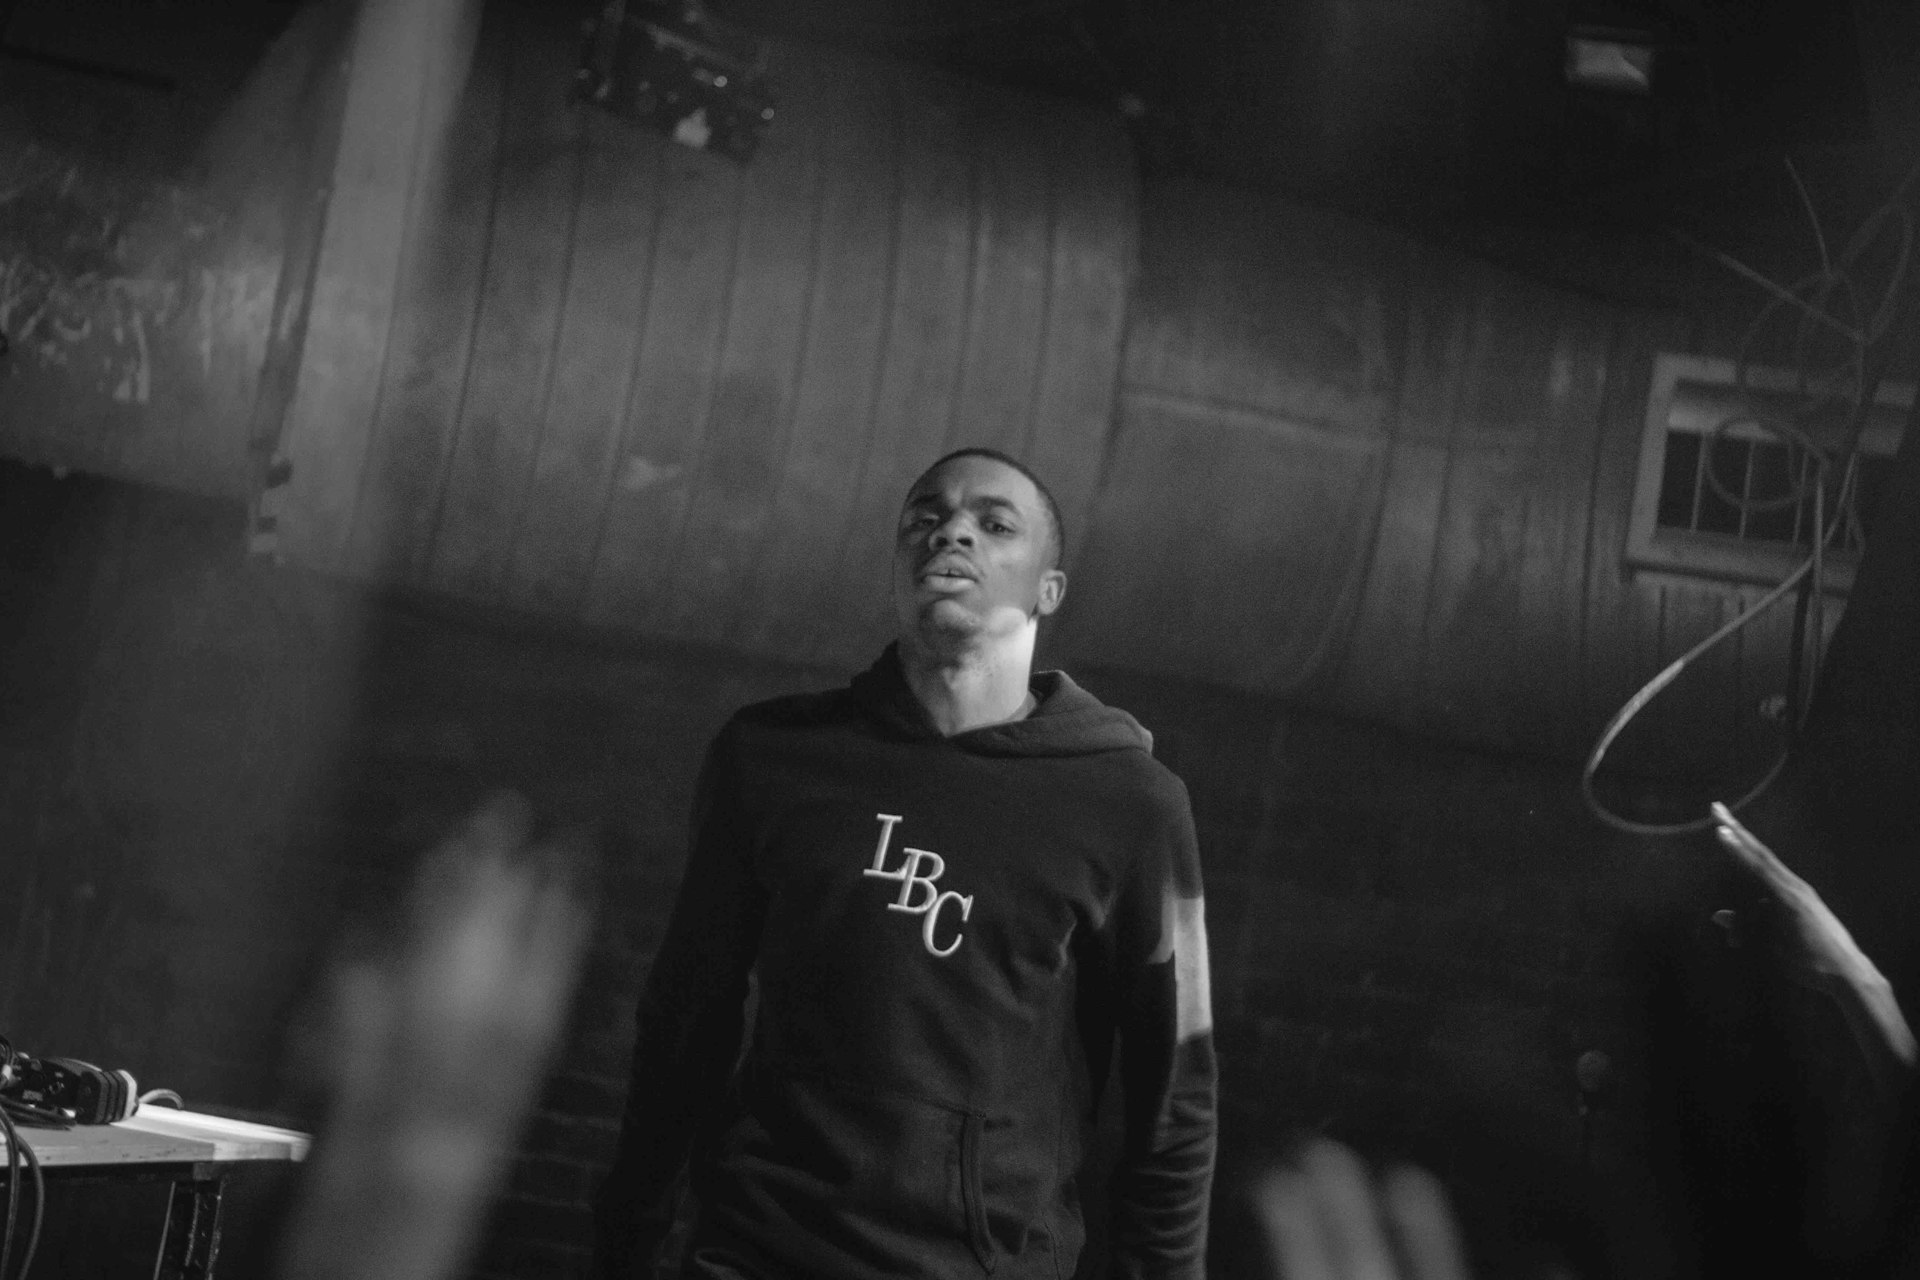 Vince Staples is bringing “the truth” to hip hop